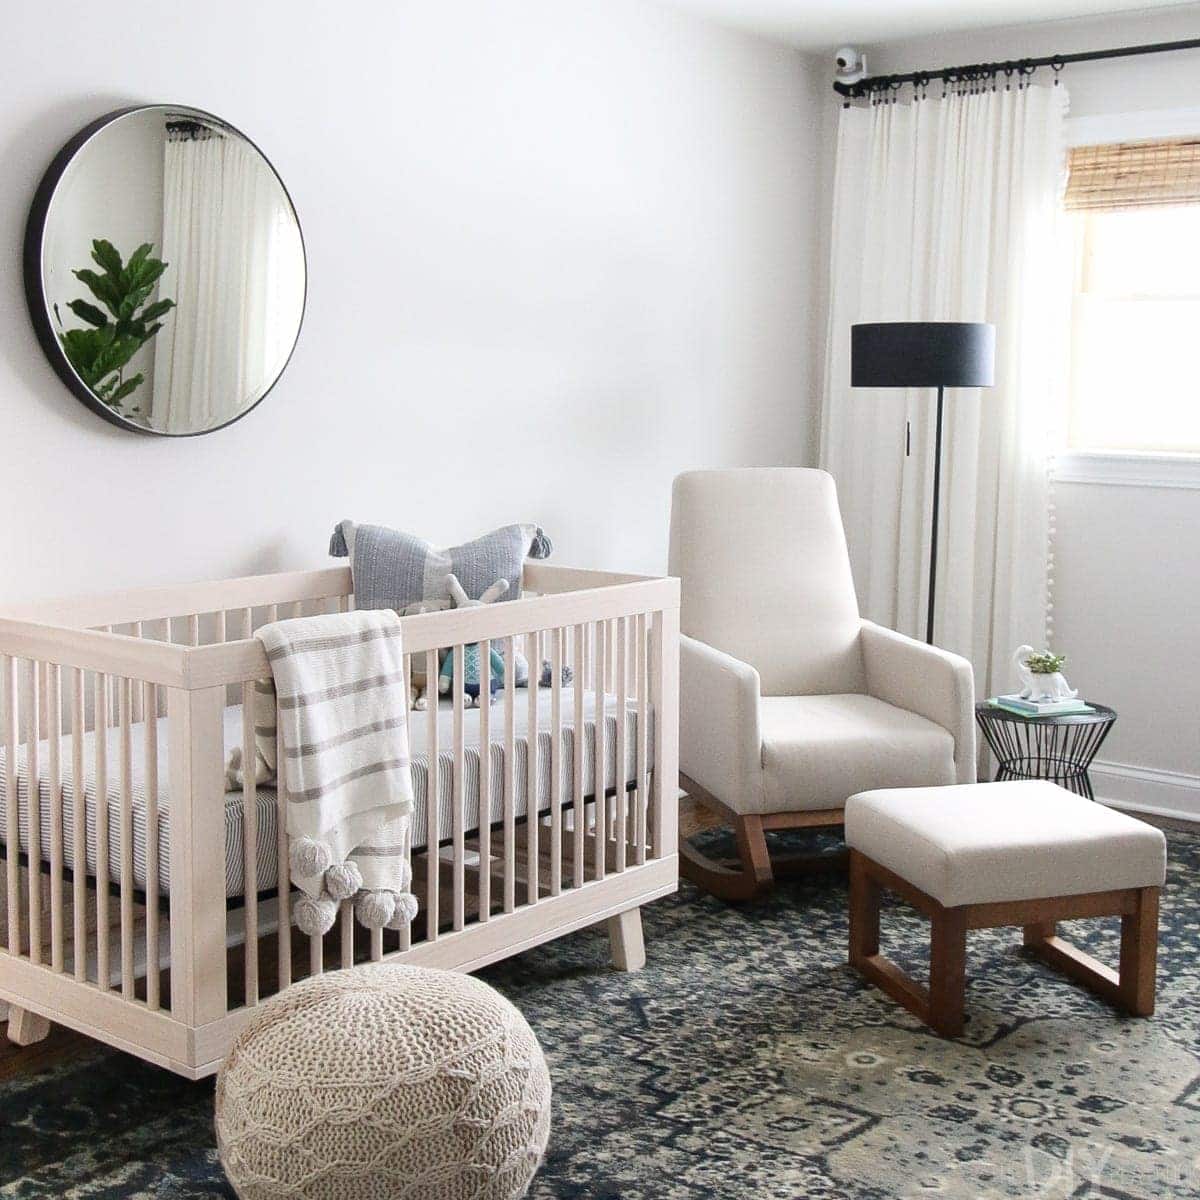 Create a nursery that will grow with your baby like this one. 